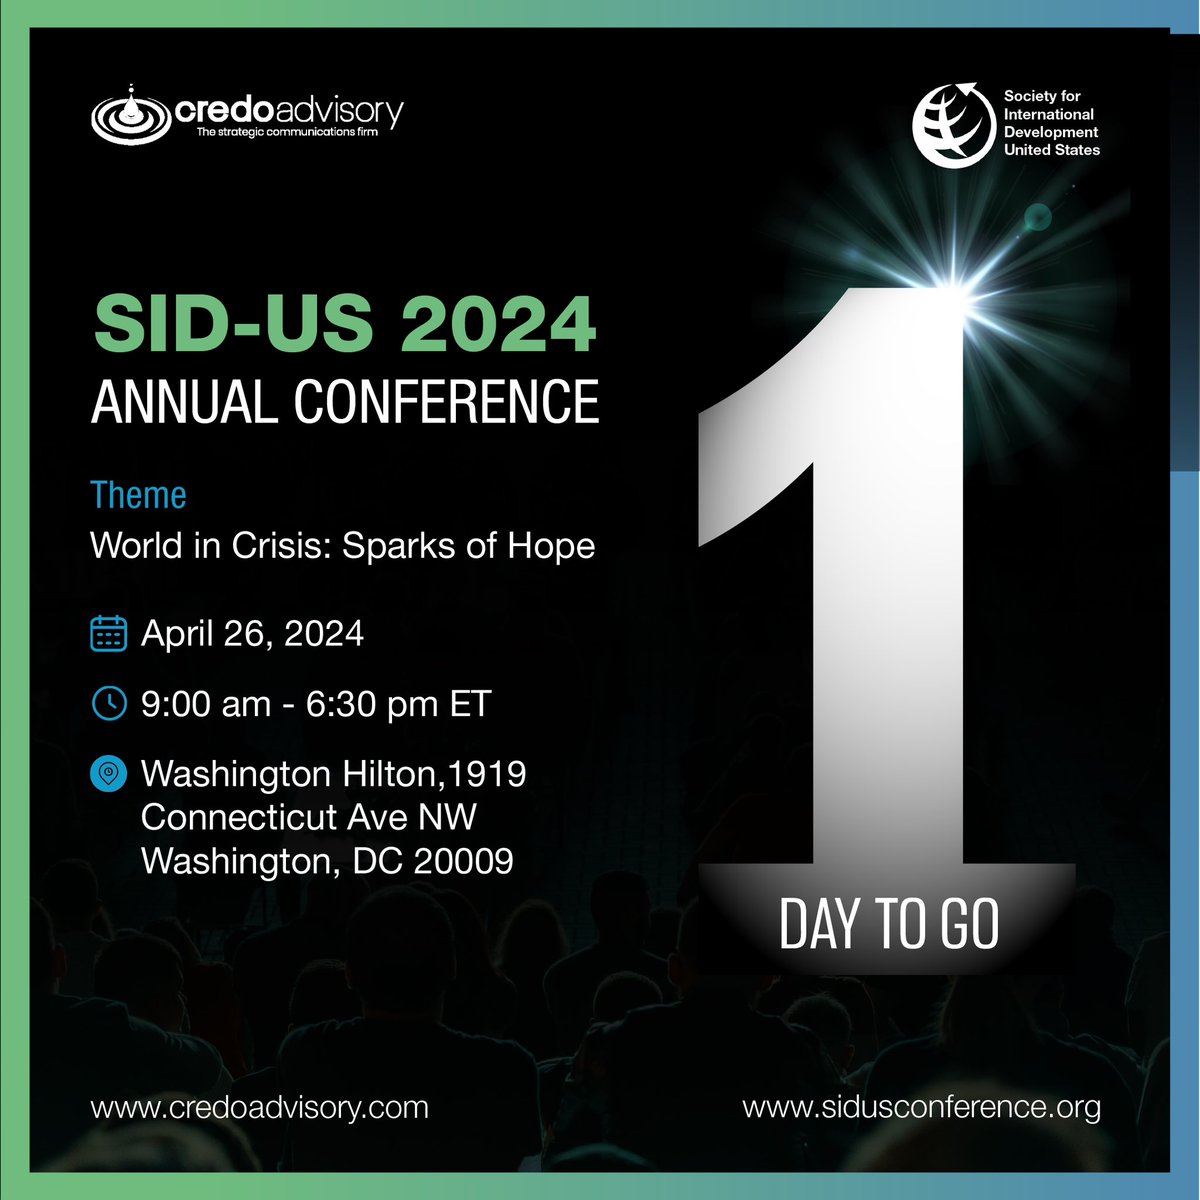 It's almost time for the 2024 #SIDUSConference! 

Tomorrow, @credoadvisory will join hundreds of other #GlobalDev professionals at the @sidunitedstates Annual Conference, with the theme: World in Crisis, Sparks of Hope.